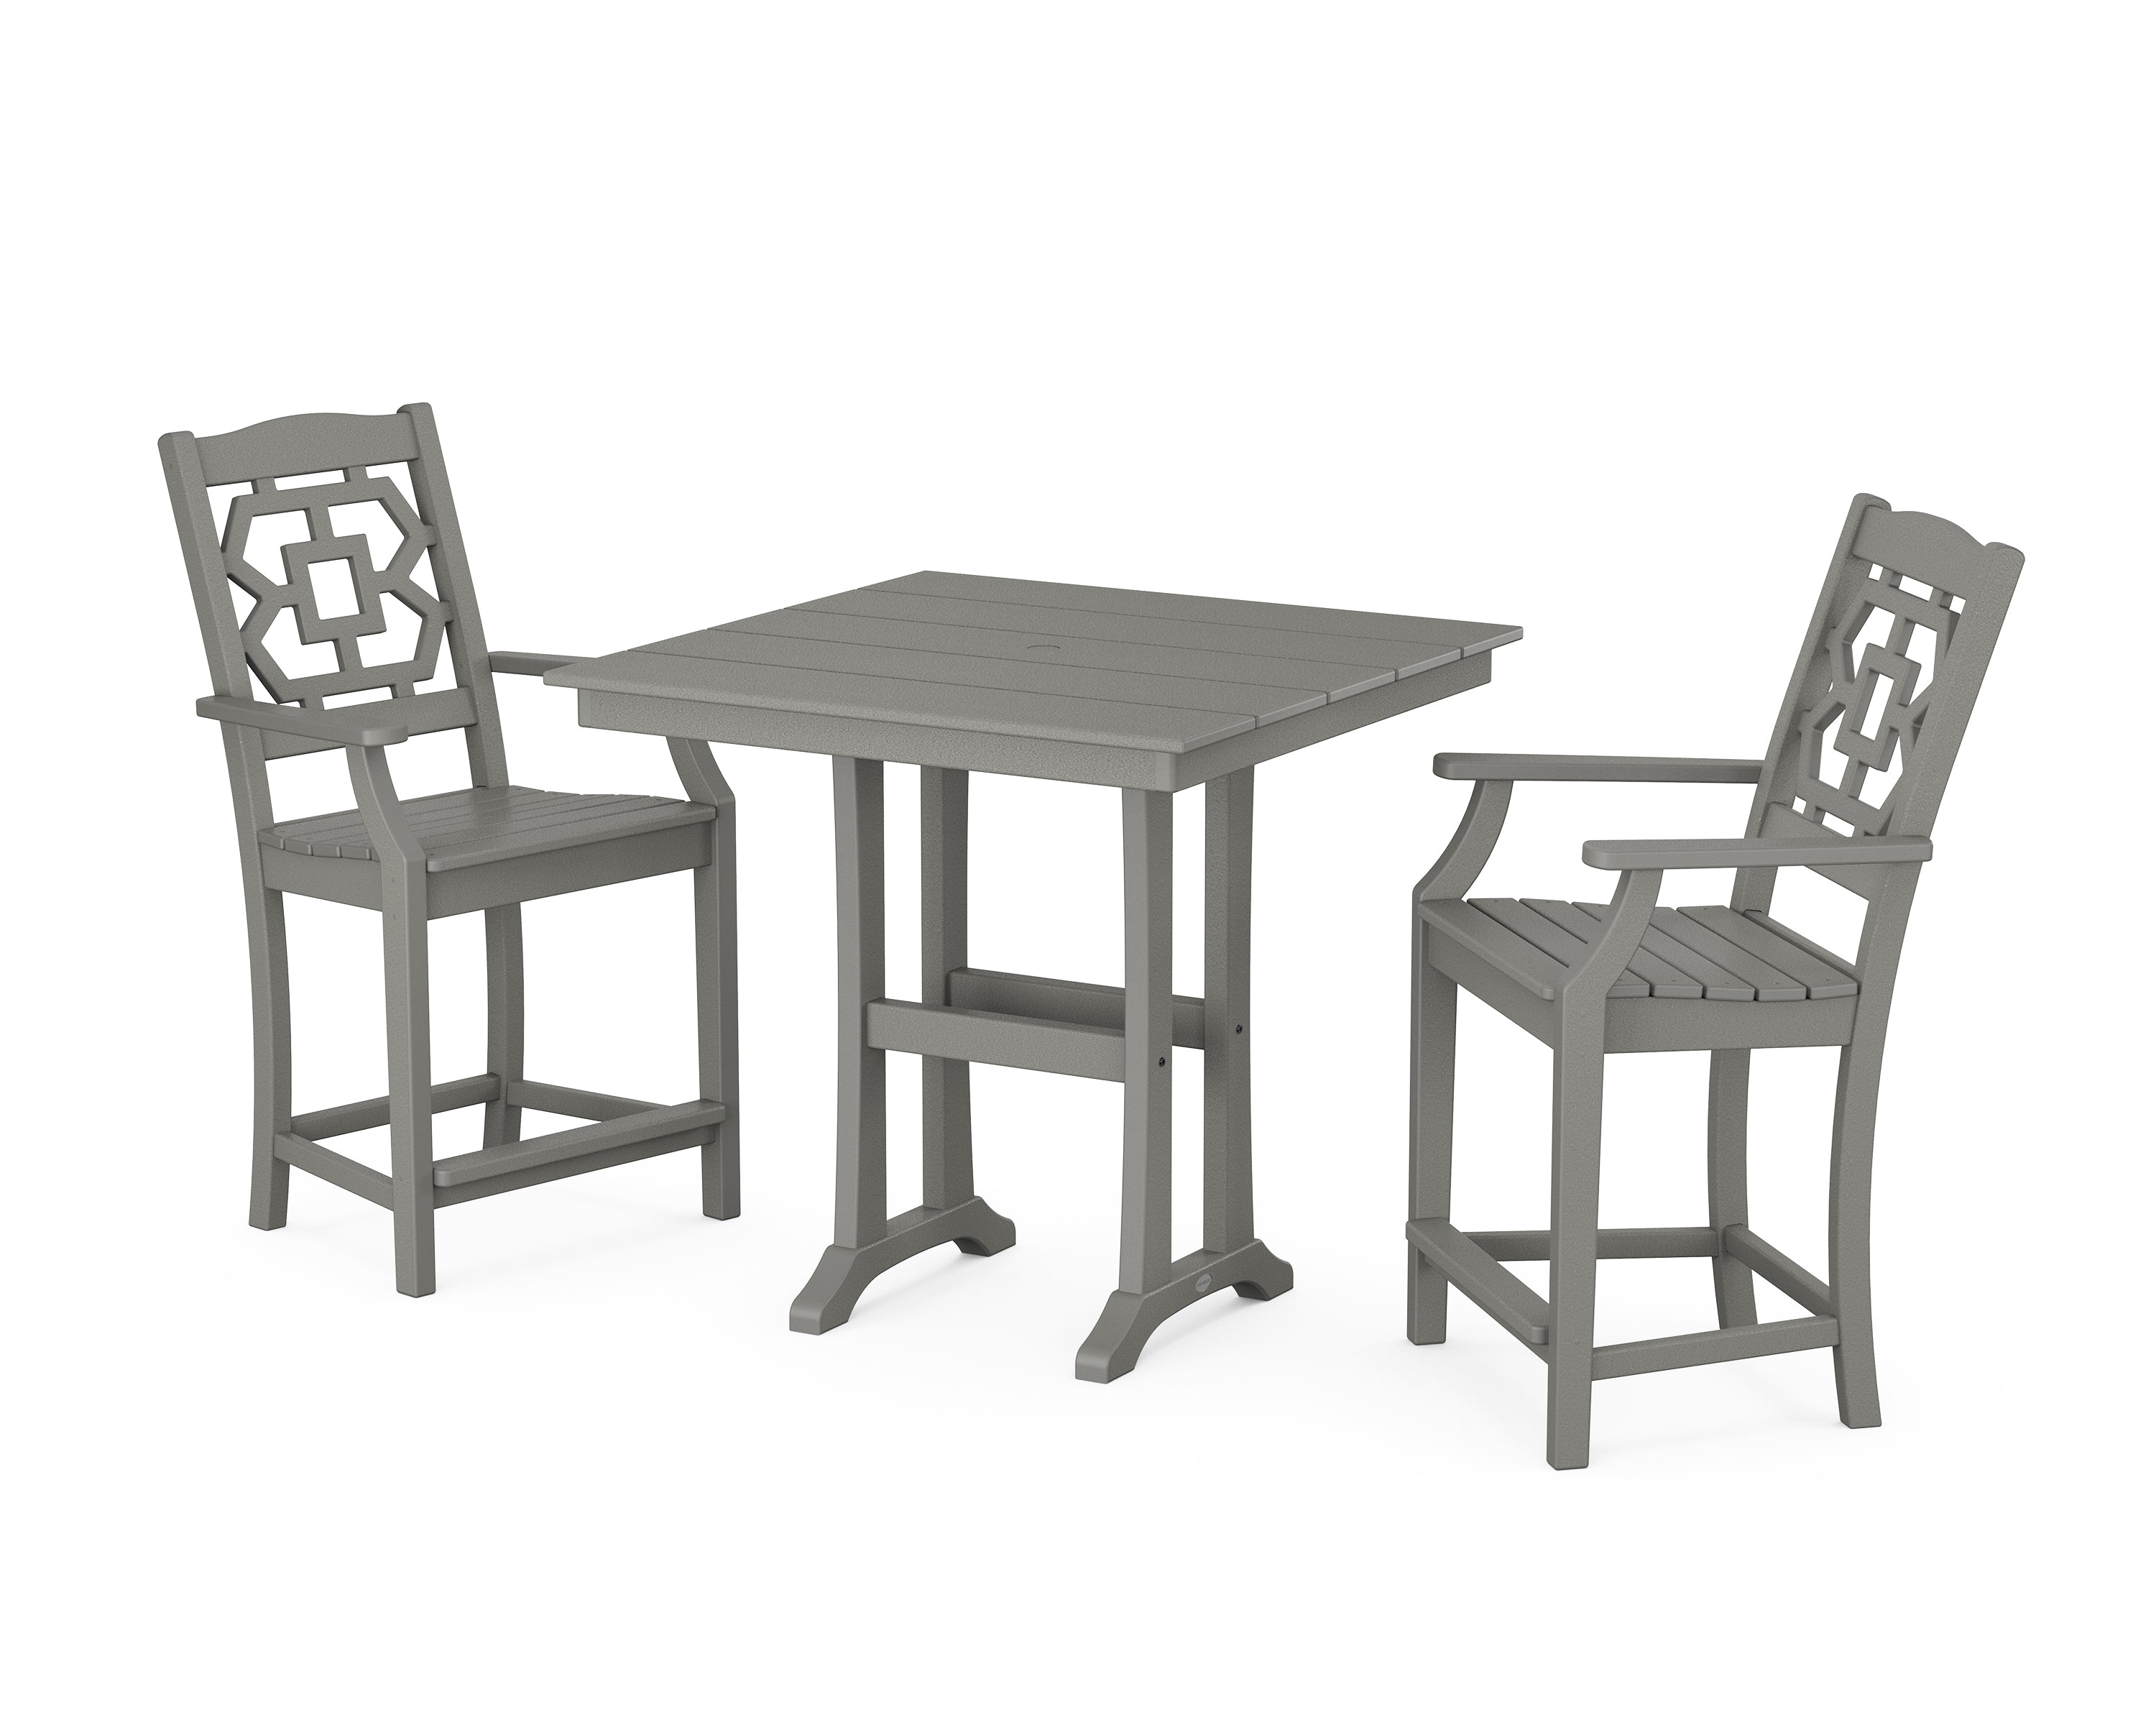 Martha Stewart by POLYWOOD® Chinoiserie 3-Piece Farmhouse Counter Set with Trestle Legs in Slate Grey